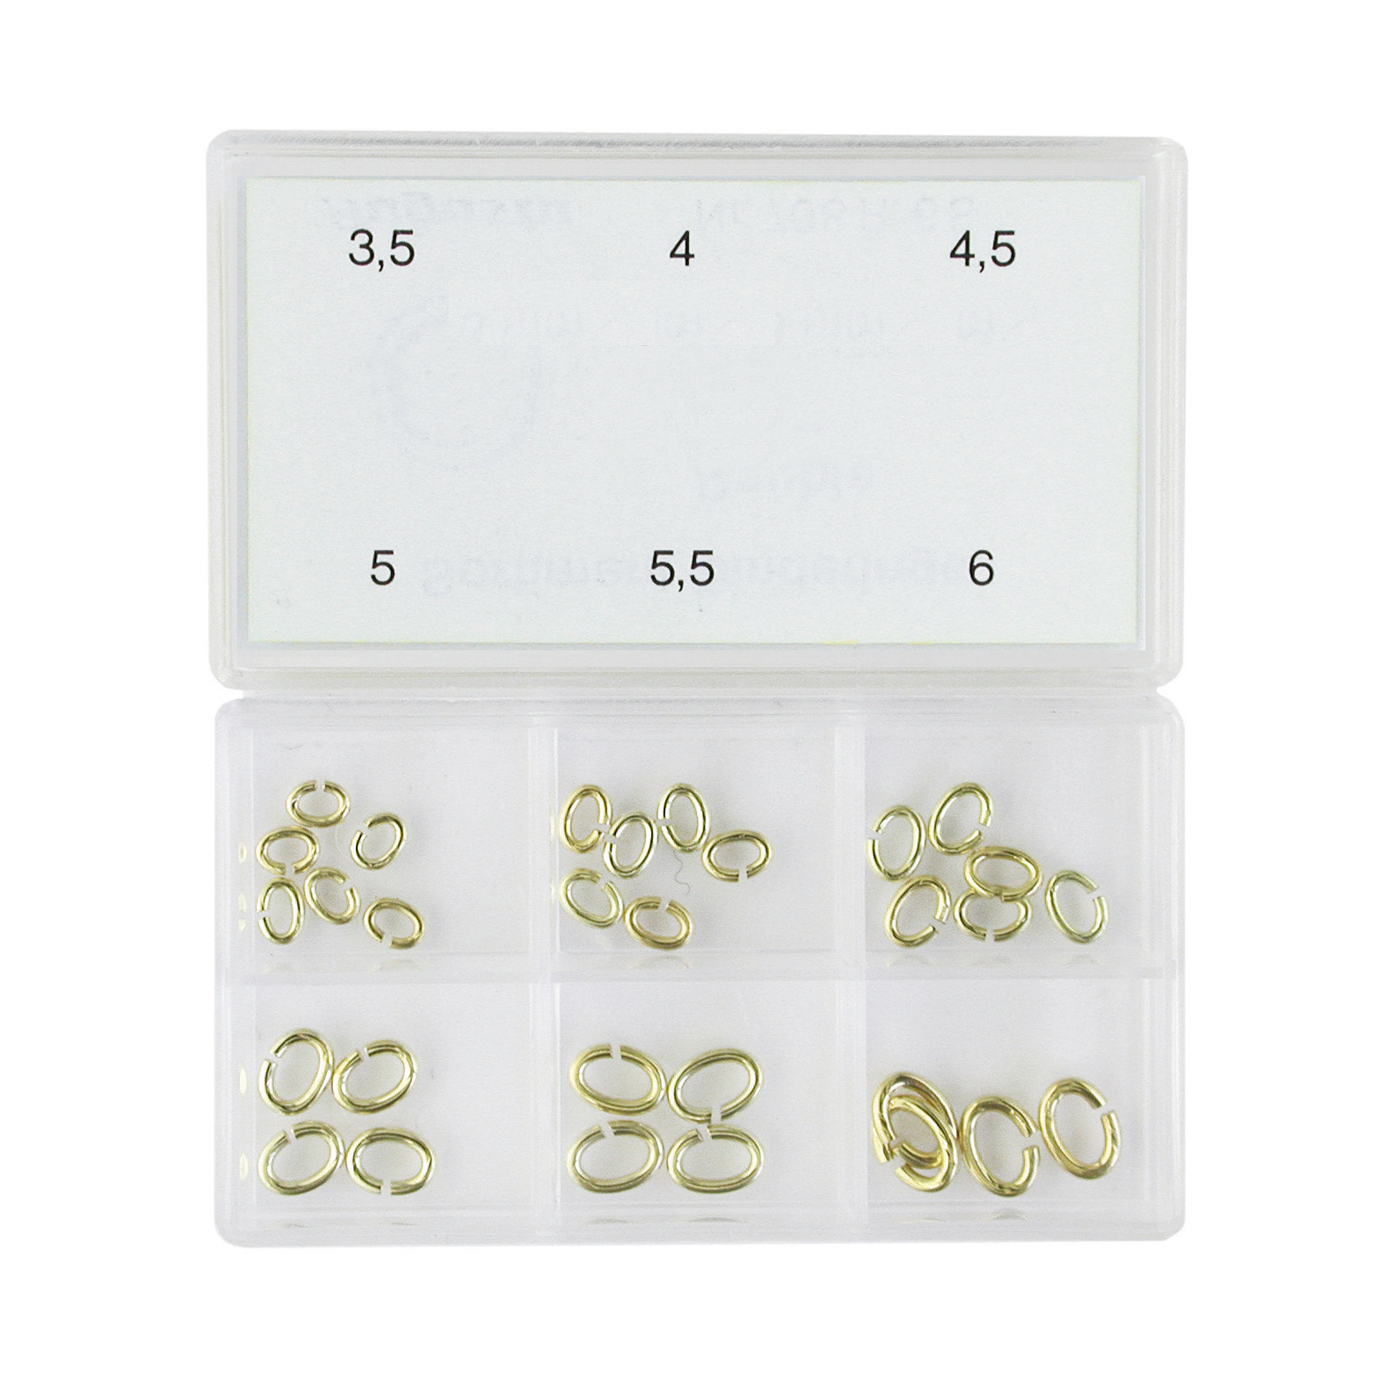 Binding Rings, Oval, Rolled Gold - 1 assortment